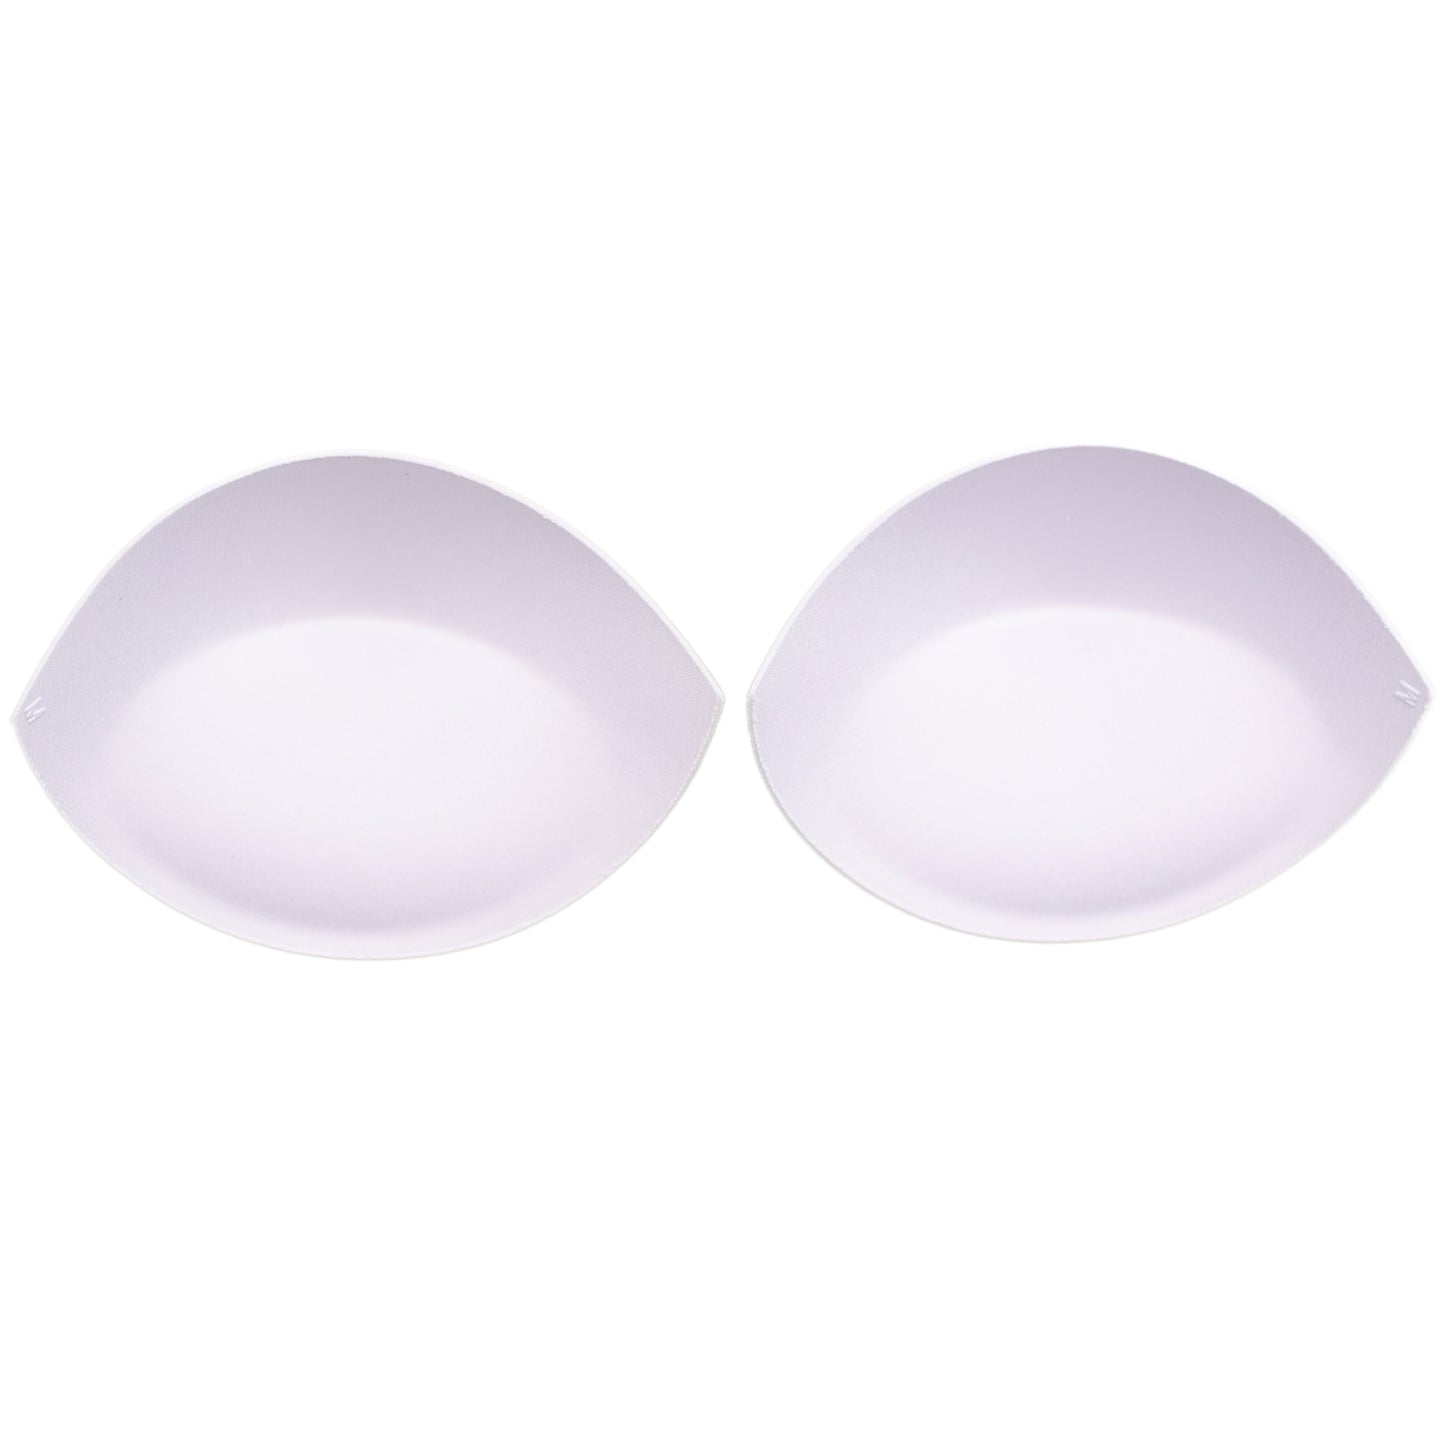 SOFT-TOUCH PUSH UP BRA CUP WHITE